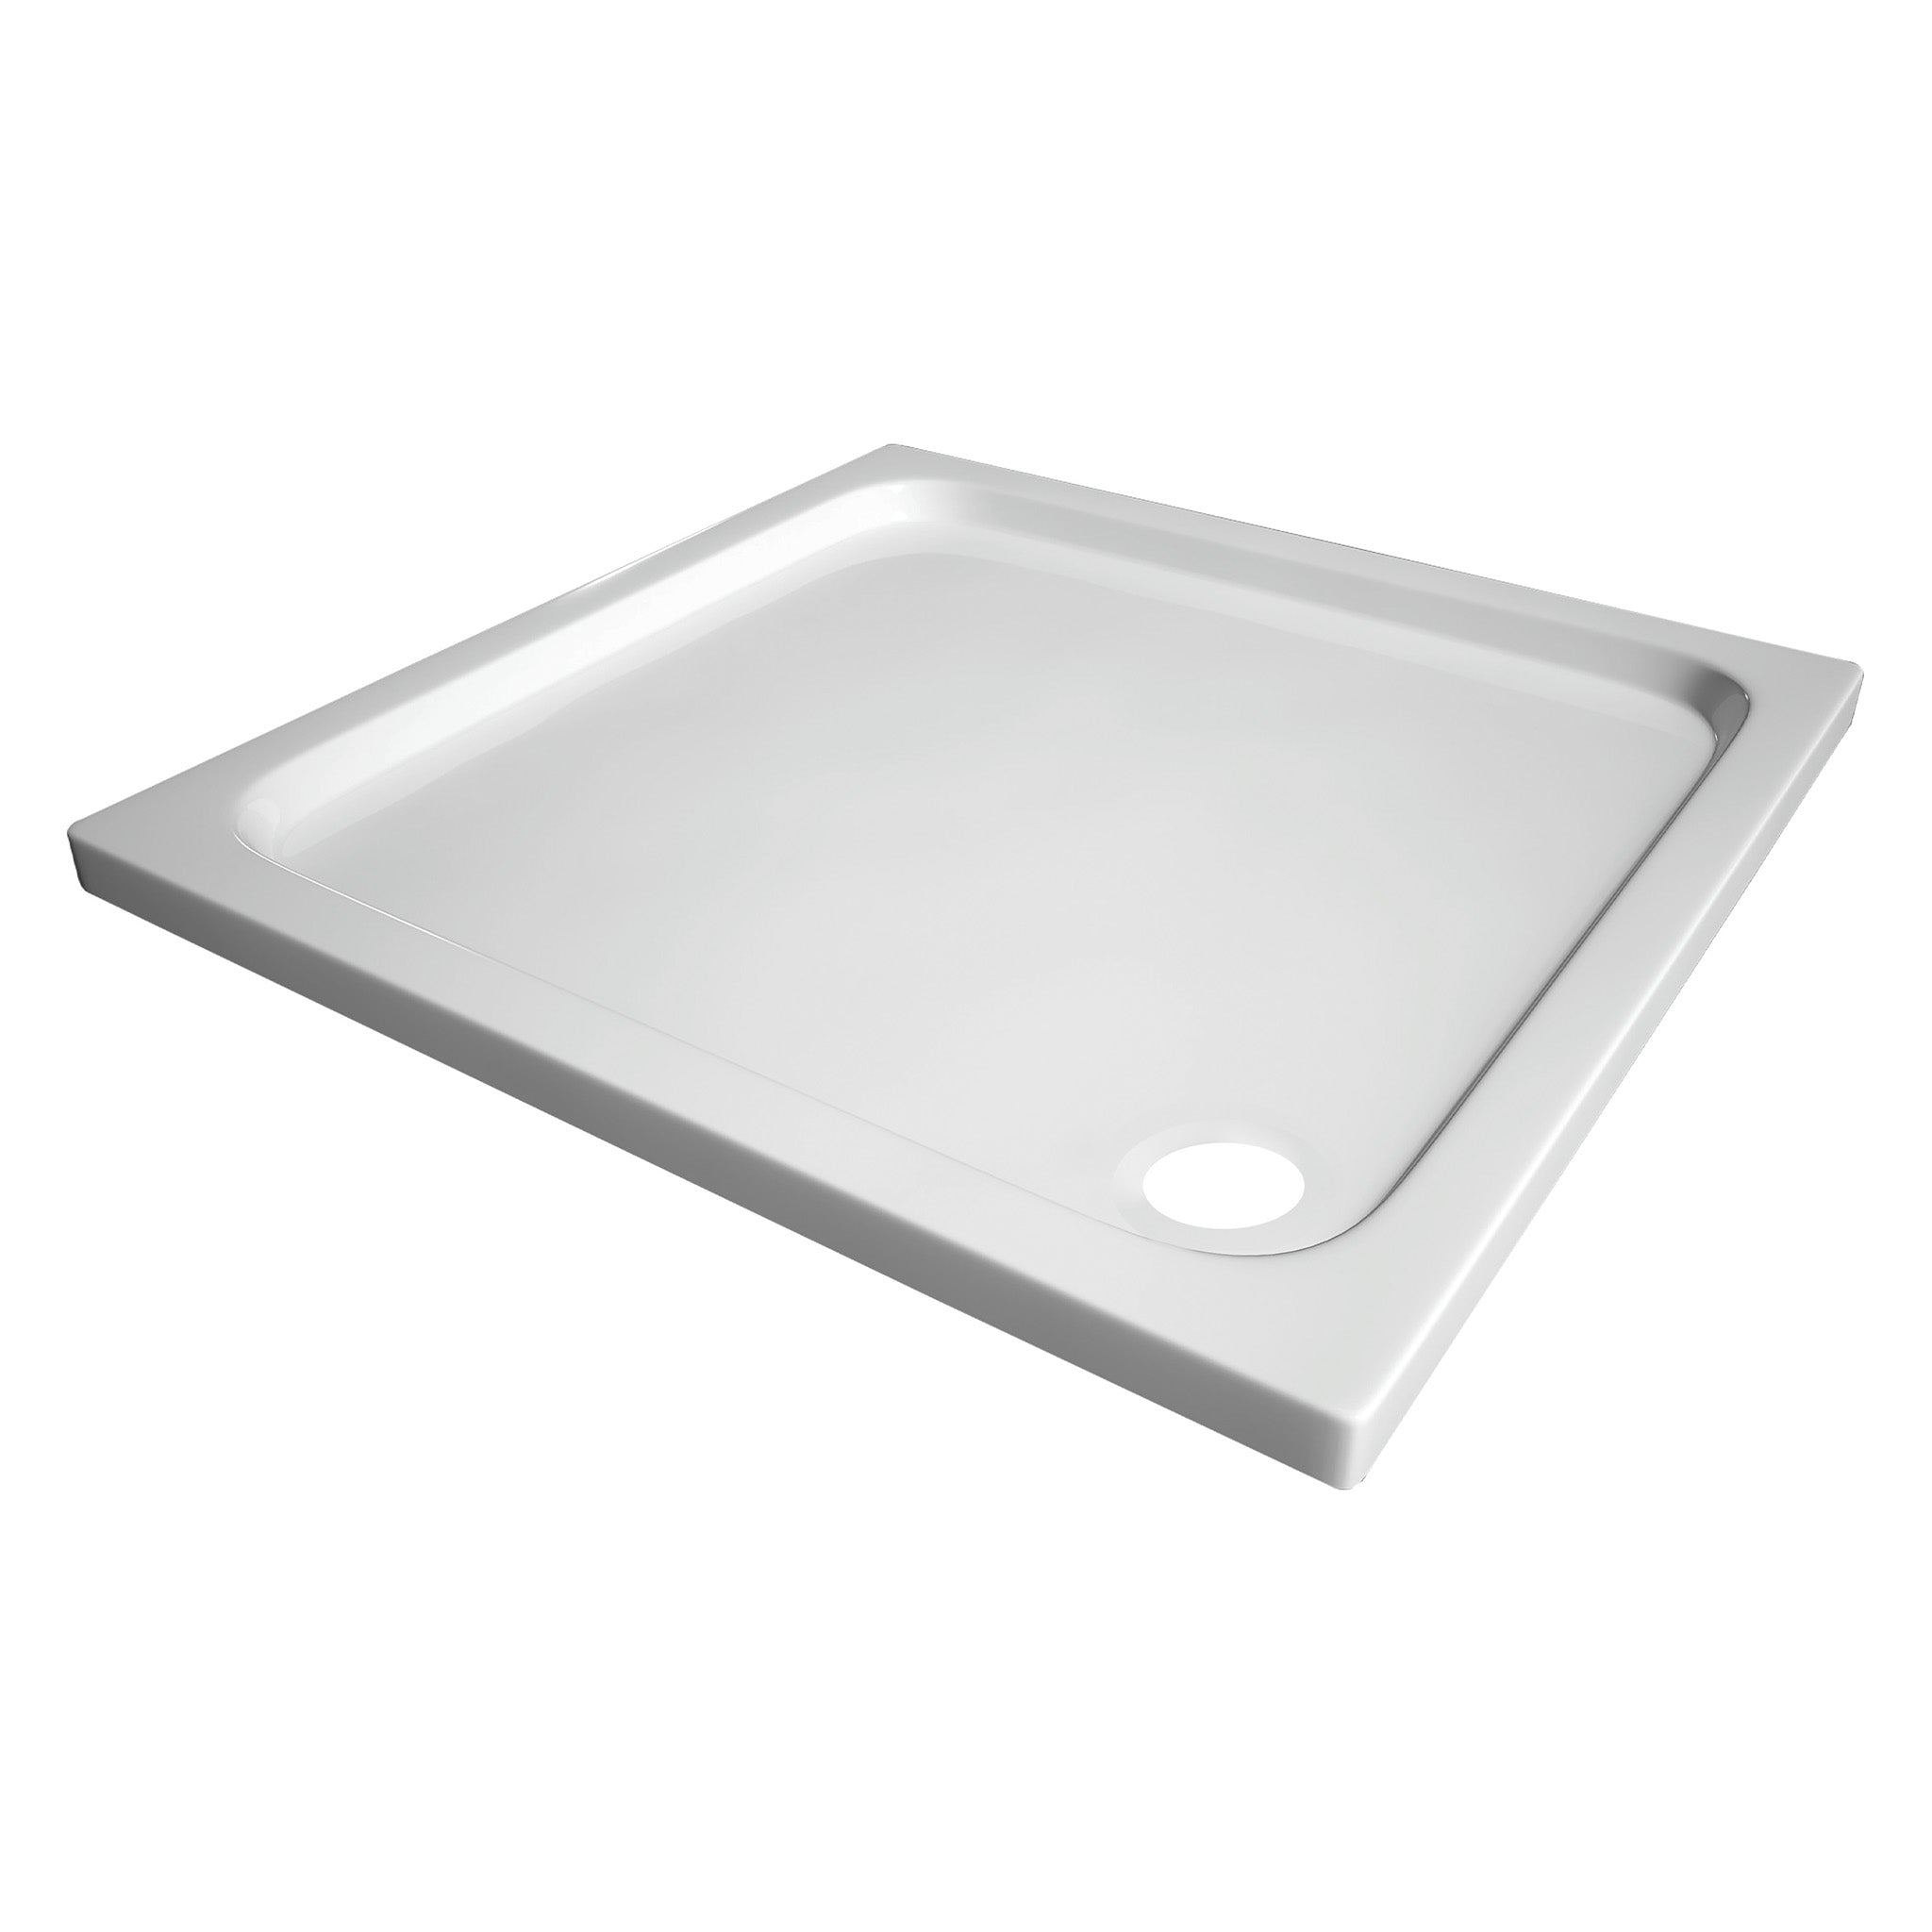 MyStyle Slimline ABS Square Shower Tray